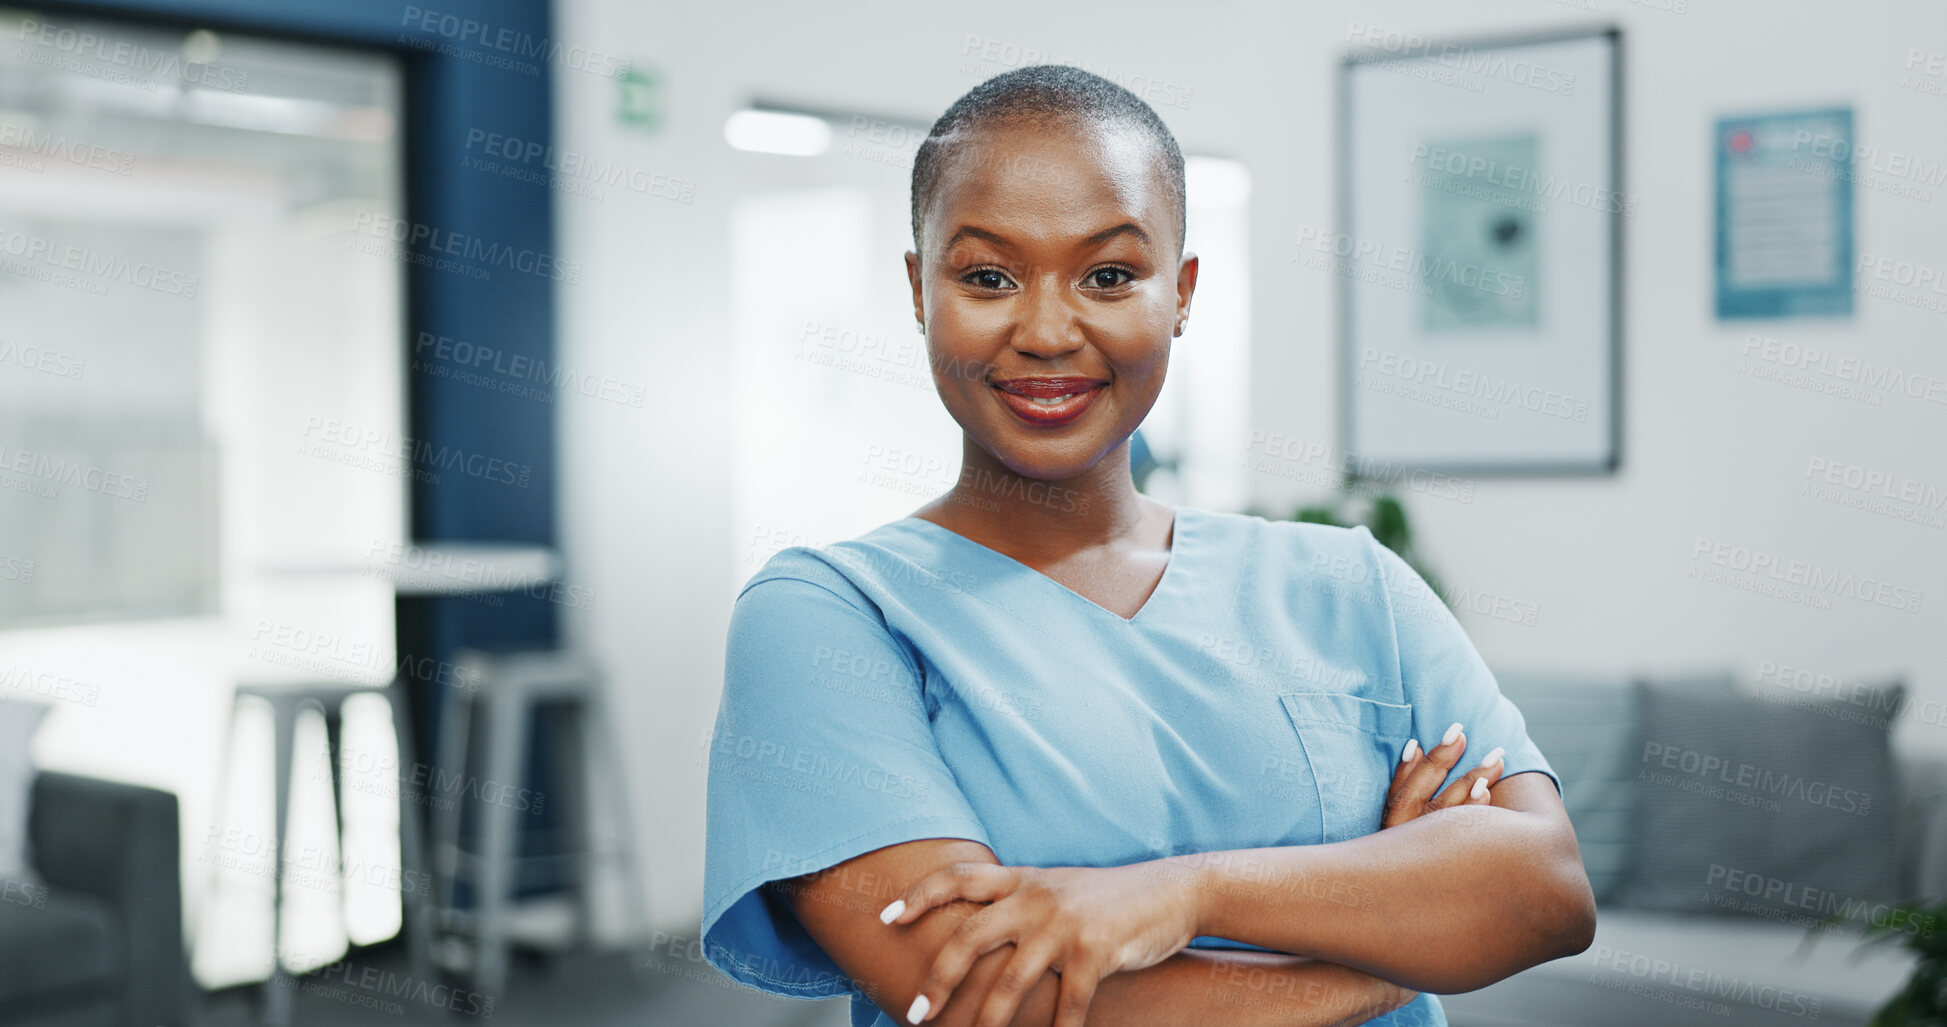 Buy stock photo Nurse, portrait or arms crossed in hospital for healthcare, medical life insurance or wellness support. Smile, face or professional black woman with confidence trust or help for medicine internship